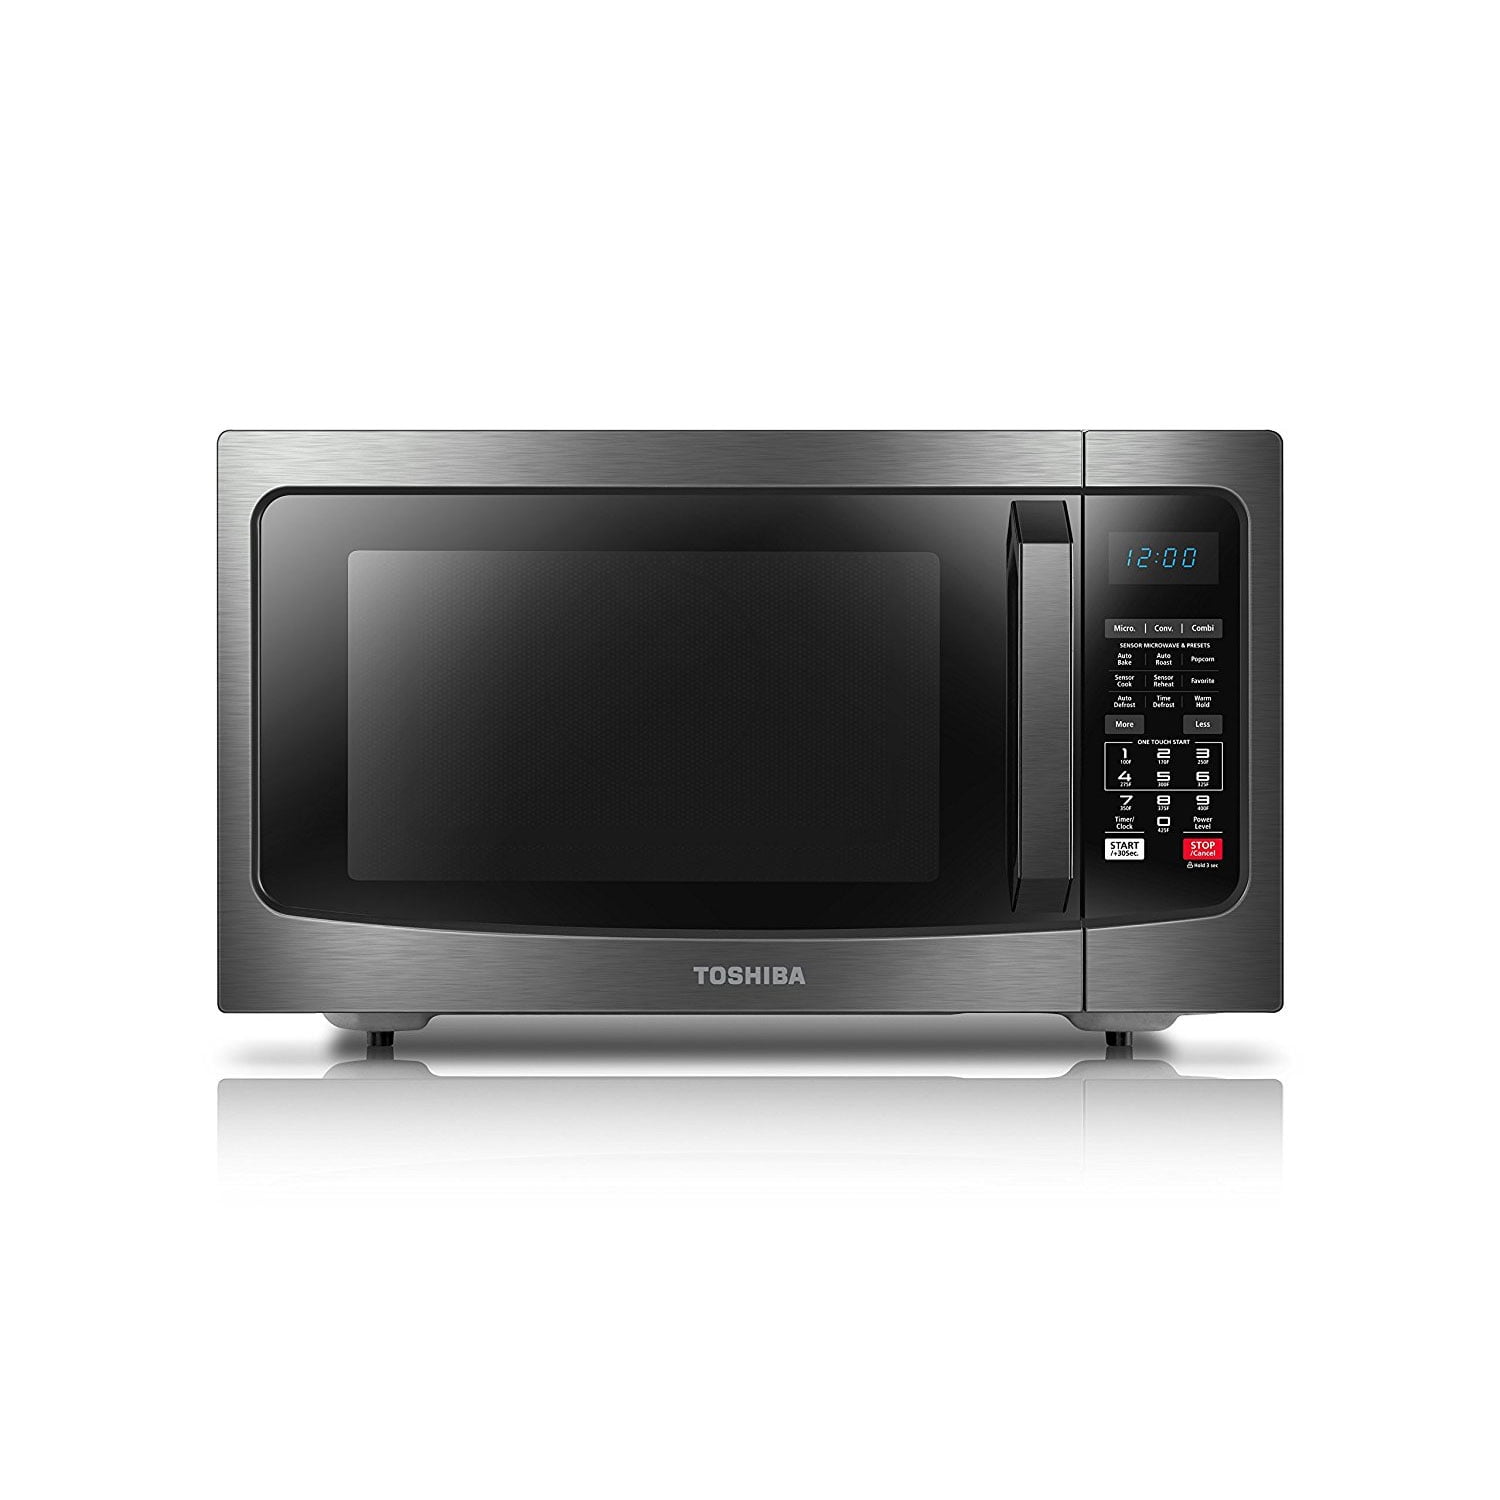 Photo 1 of ***PARTS ONLY*** Toshiba Smart Sensor LED Light 1.5 Ft Stainless Convection Microwave Oven, Black
